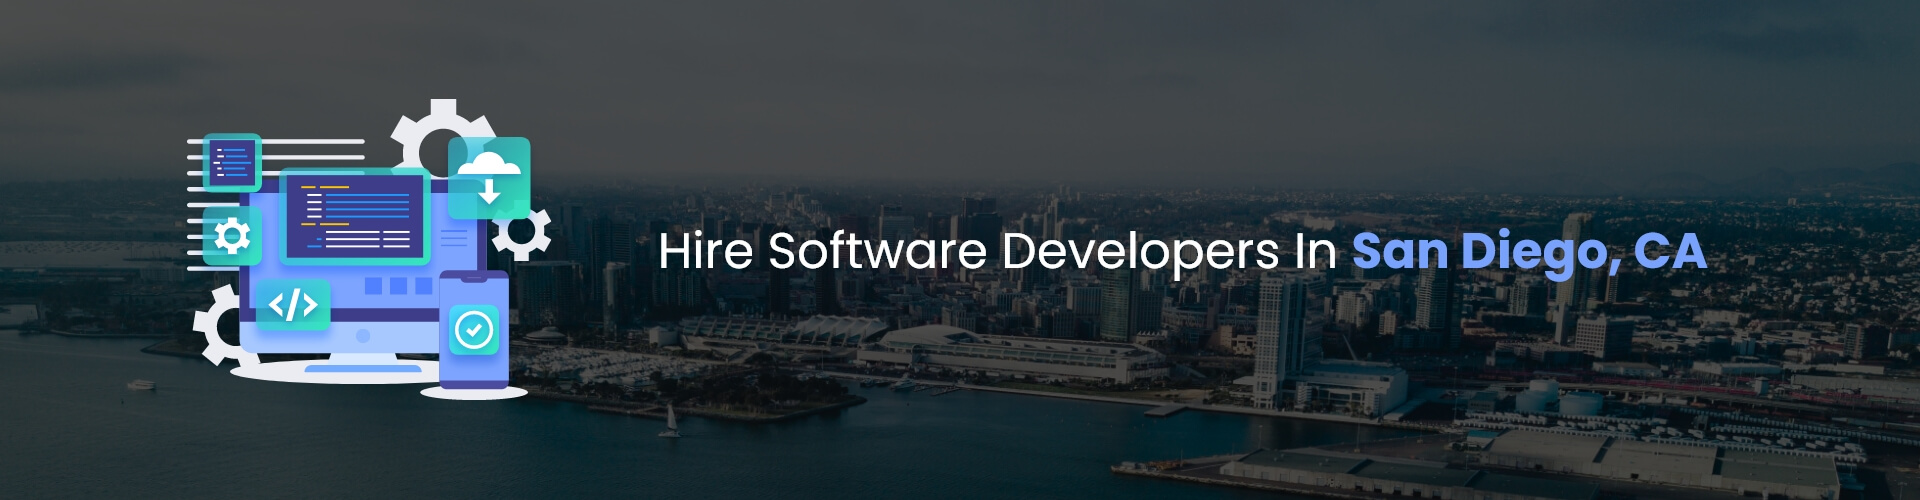 hire software developers in san diego